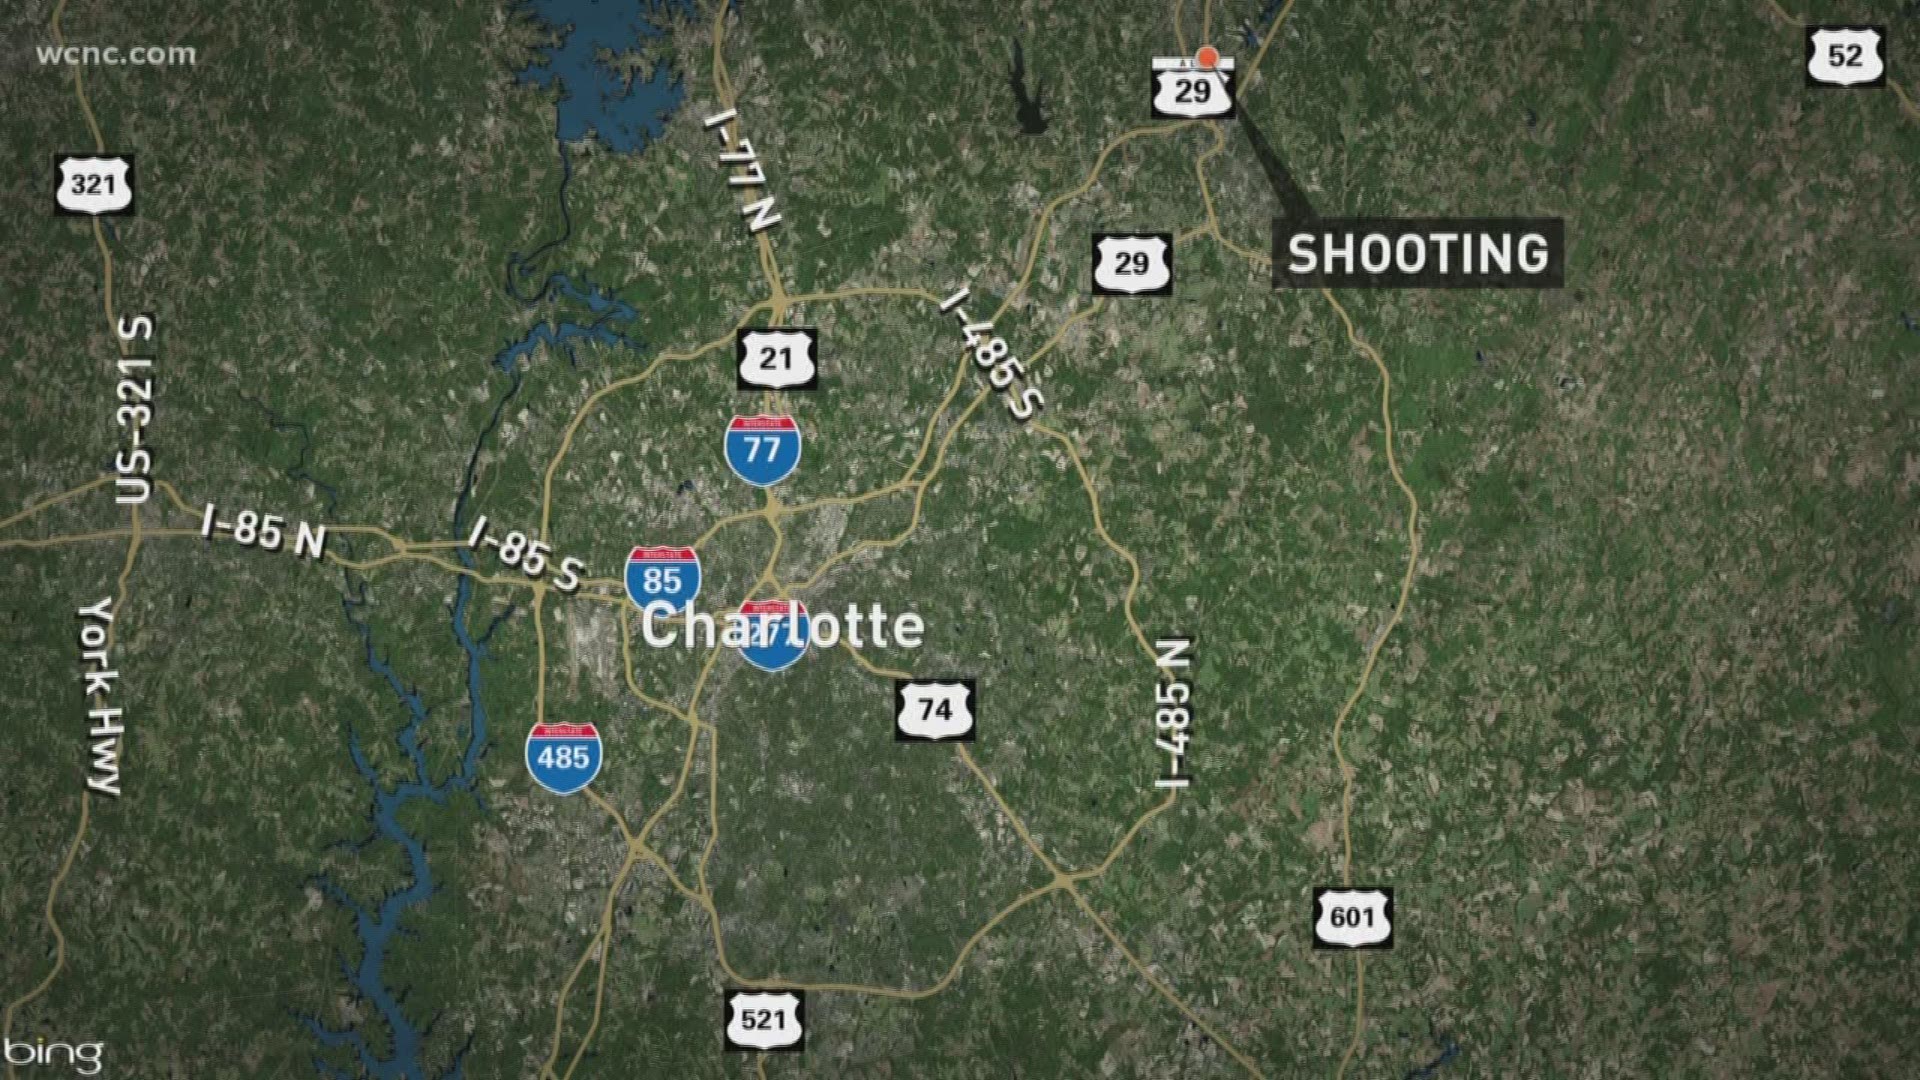 Police say four people were shot outside a graduation party in Kannapolis Saturday night.